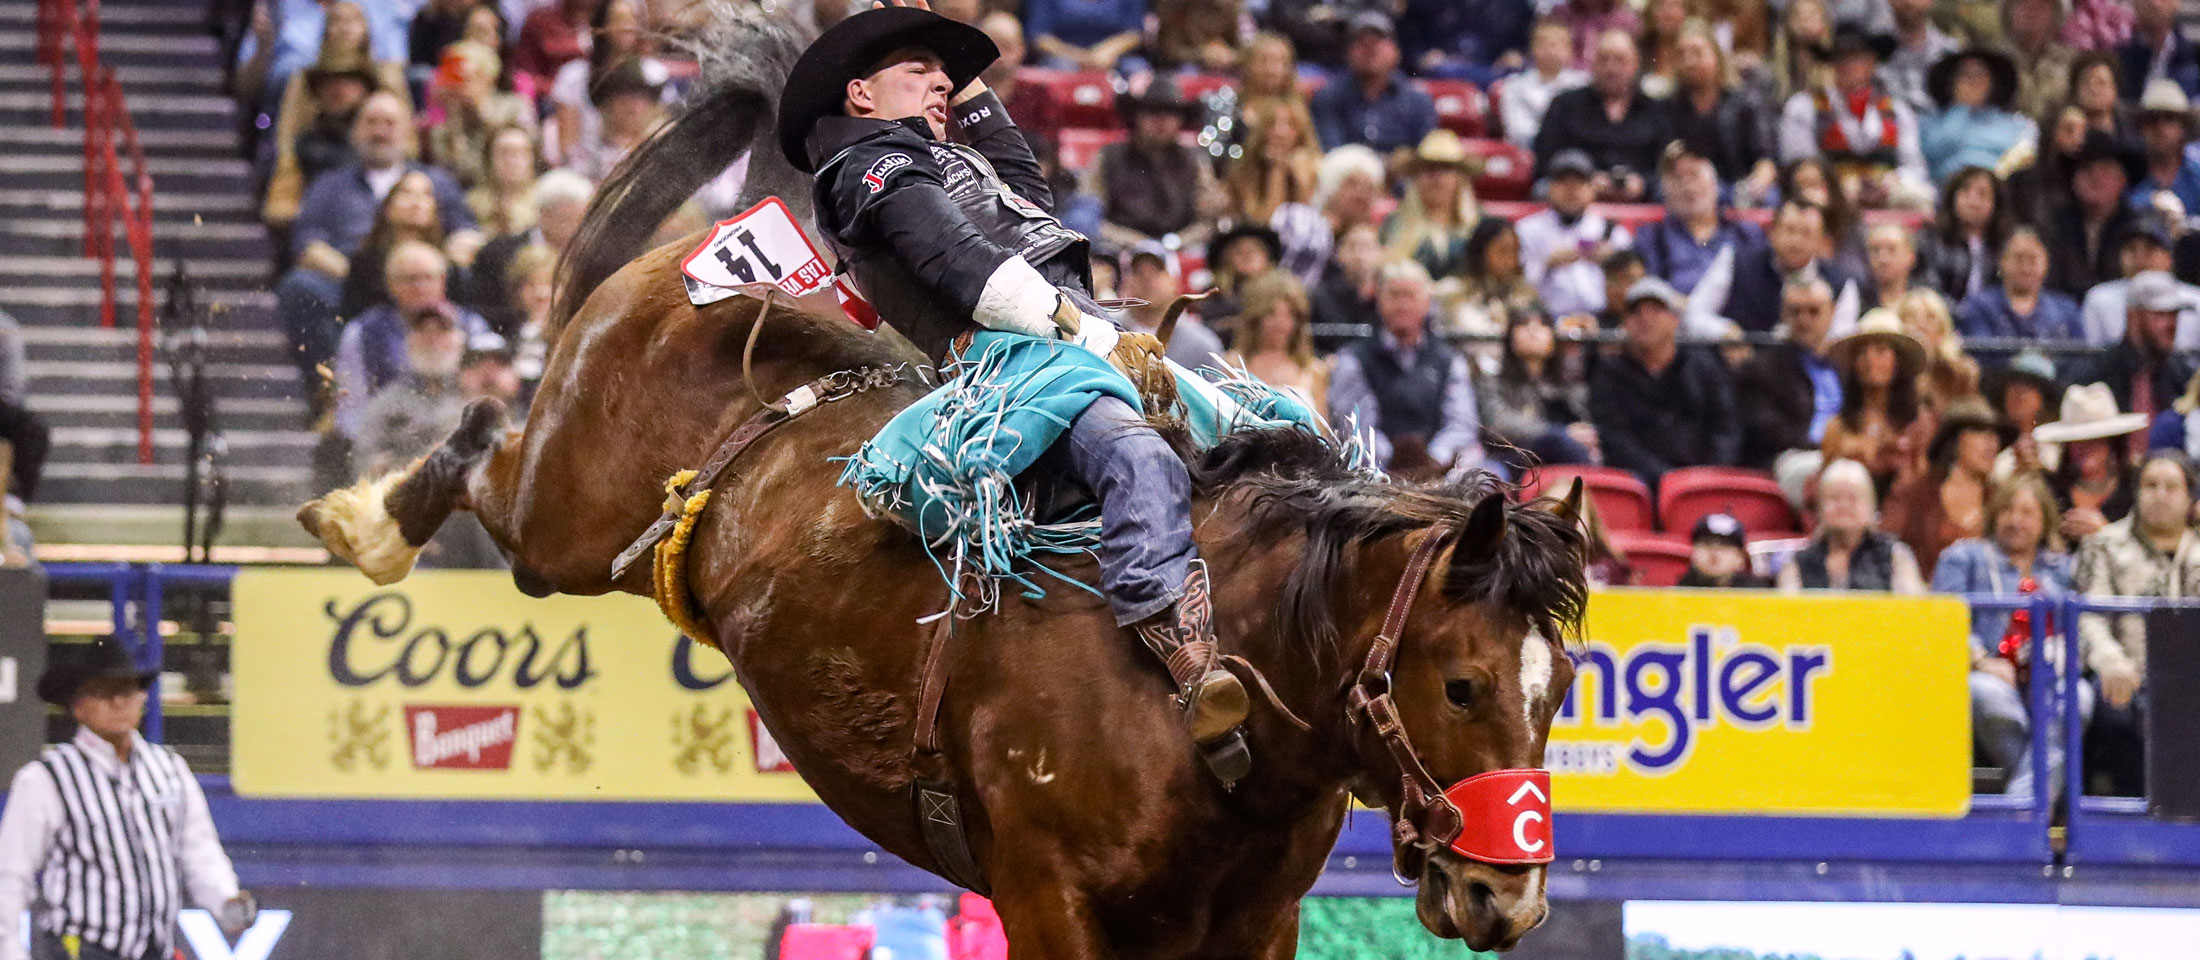 A Cowboy, Jess Pope, wearing turquoise fringe chaps with a black felt cowboy hat, riding a brown bareback bronc horse at the NFR with fans in the crowd.